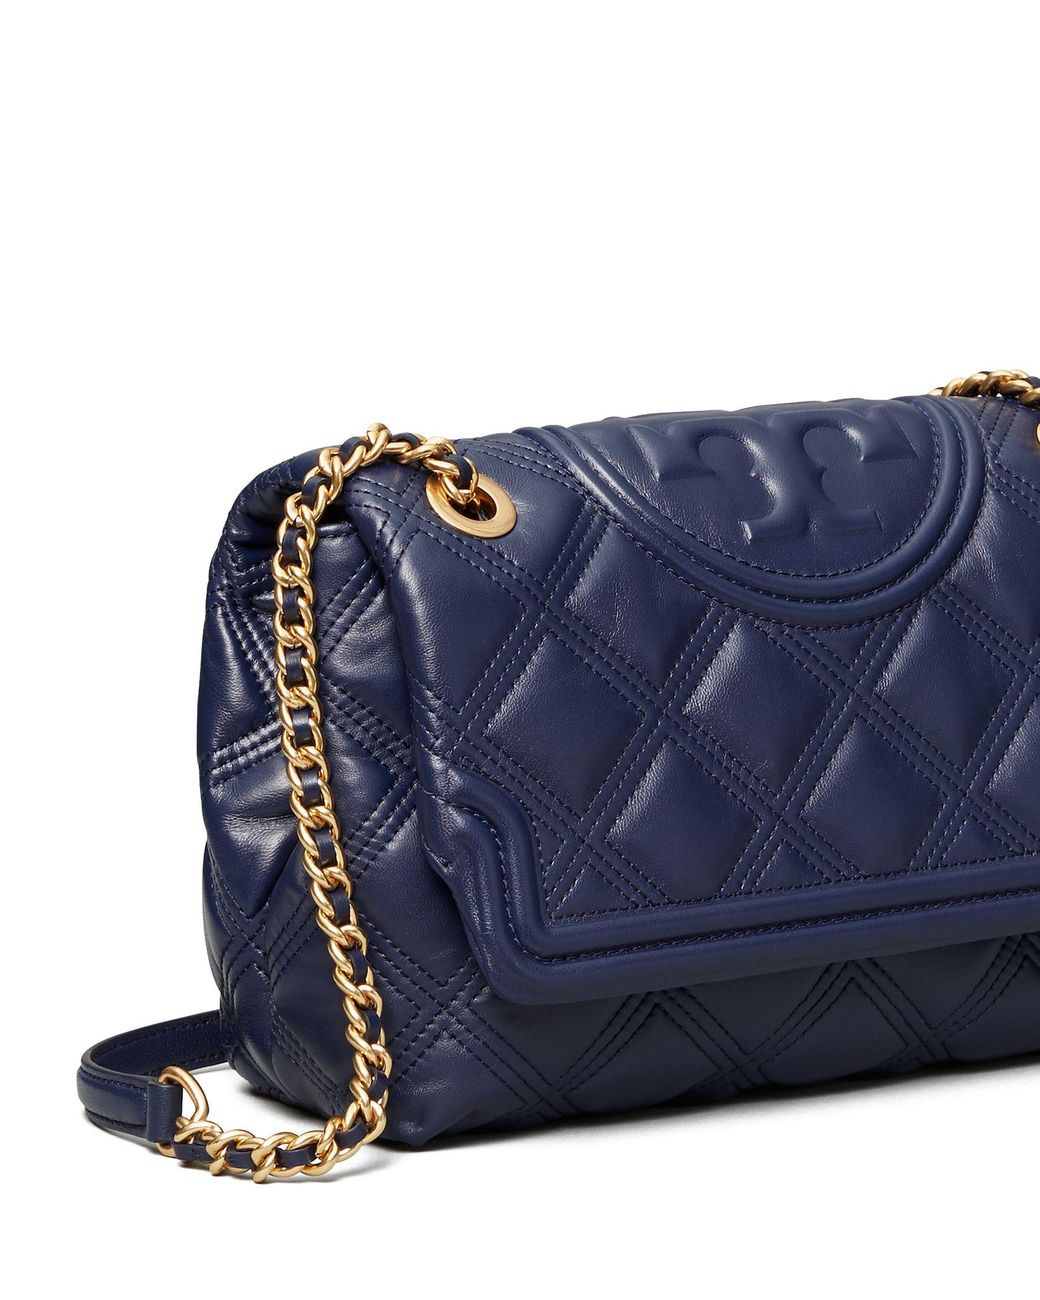 Tory Burch Fleming Soft Convertible Leather Shoulder Bag in Blue 